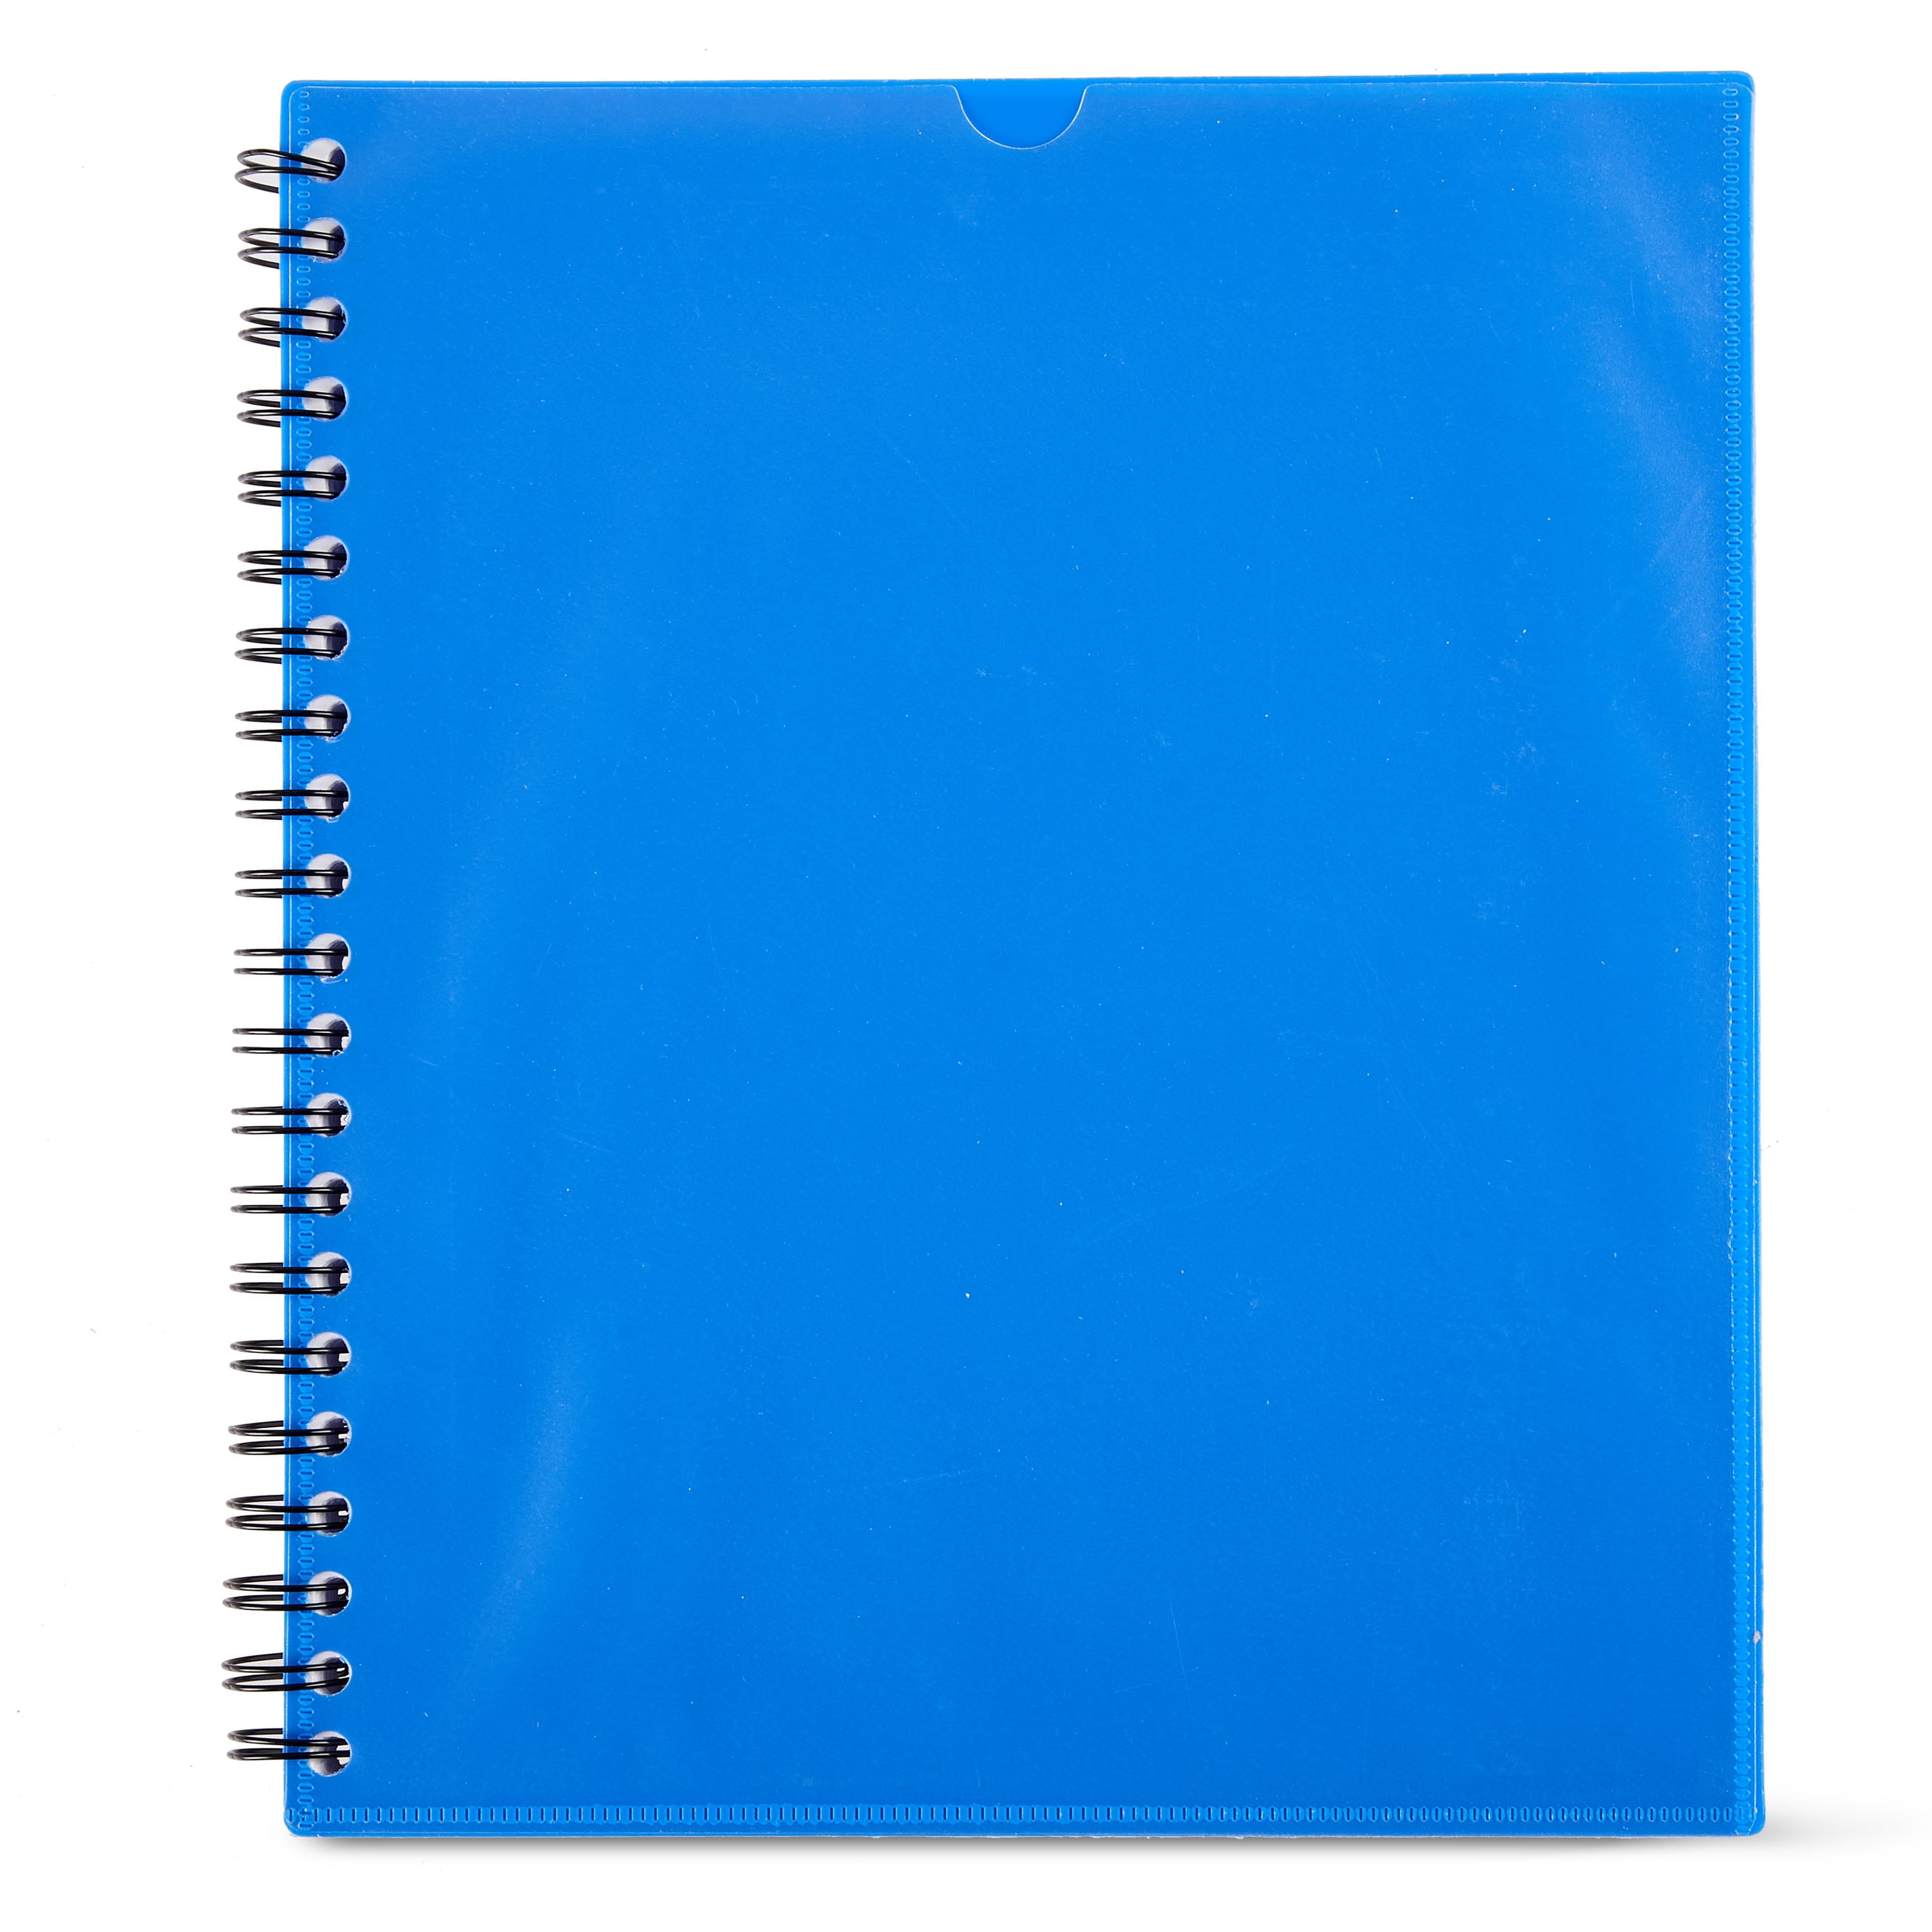 2PC Pacon Art1st Sketch Diary 64 lb Text Paper Stock Blue Cover 70 9 x  6 Sheets  Walmartcom